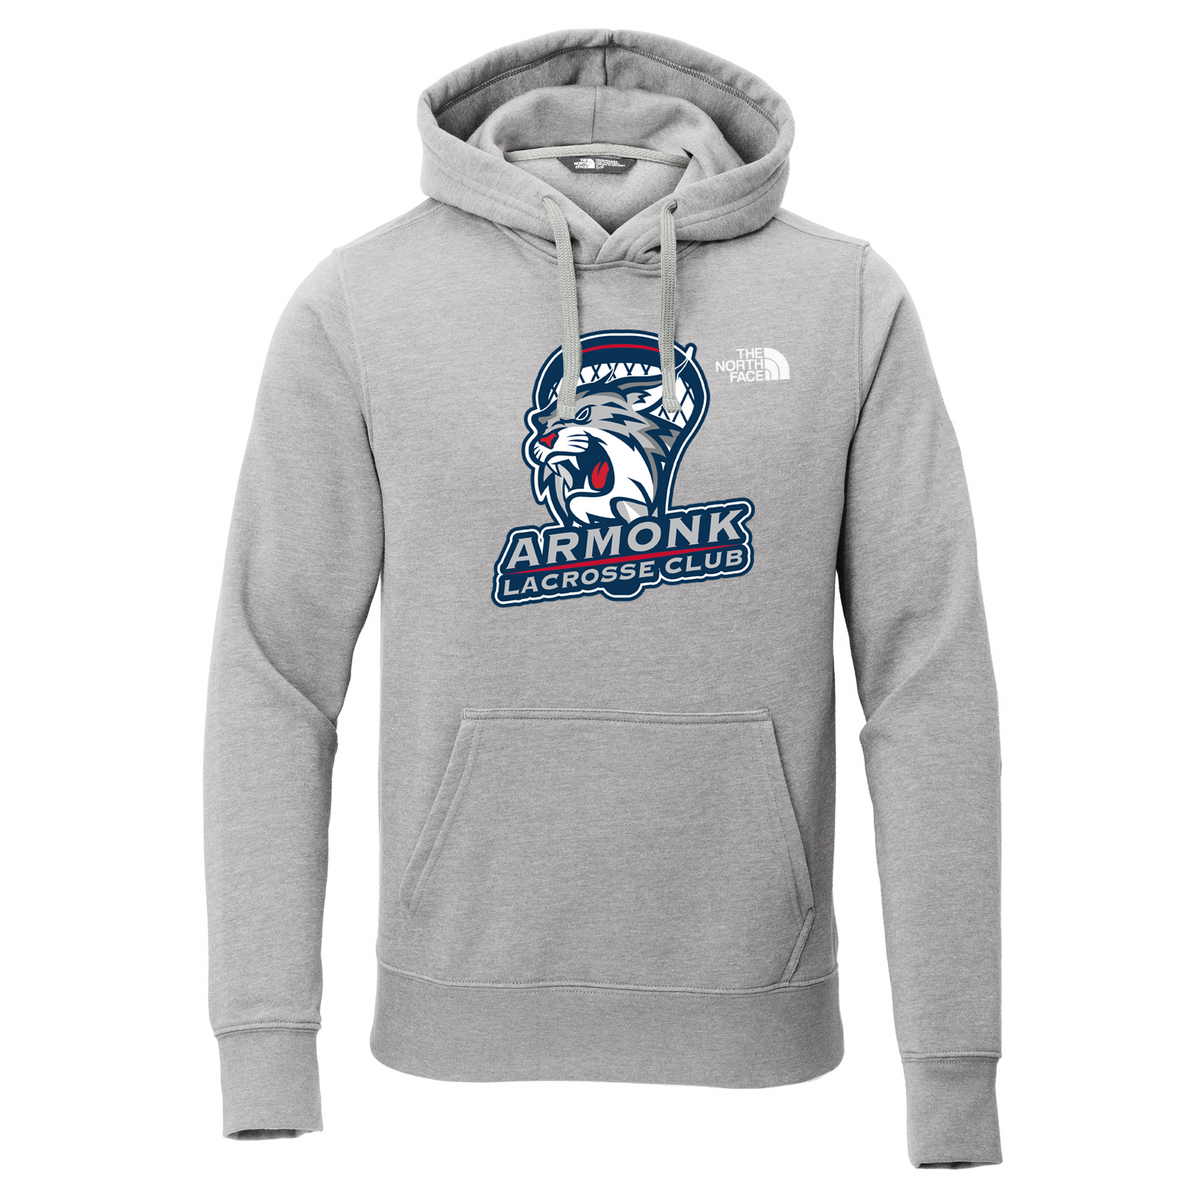 Armonk Lacrosse Club The North Face Pullover Hoodie (Adult Only)